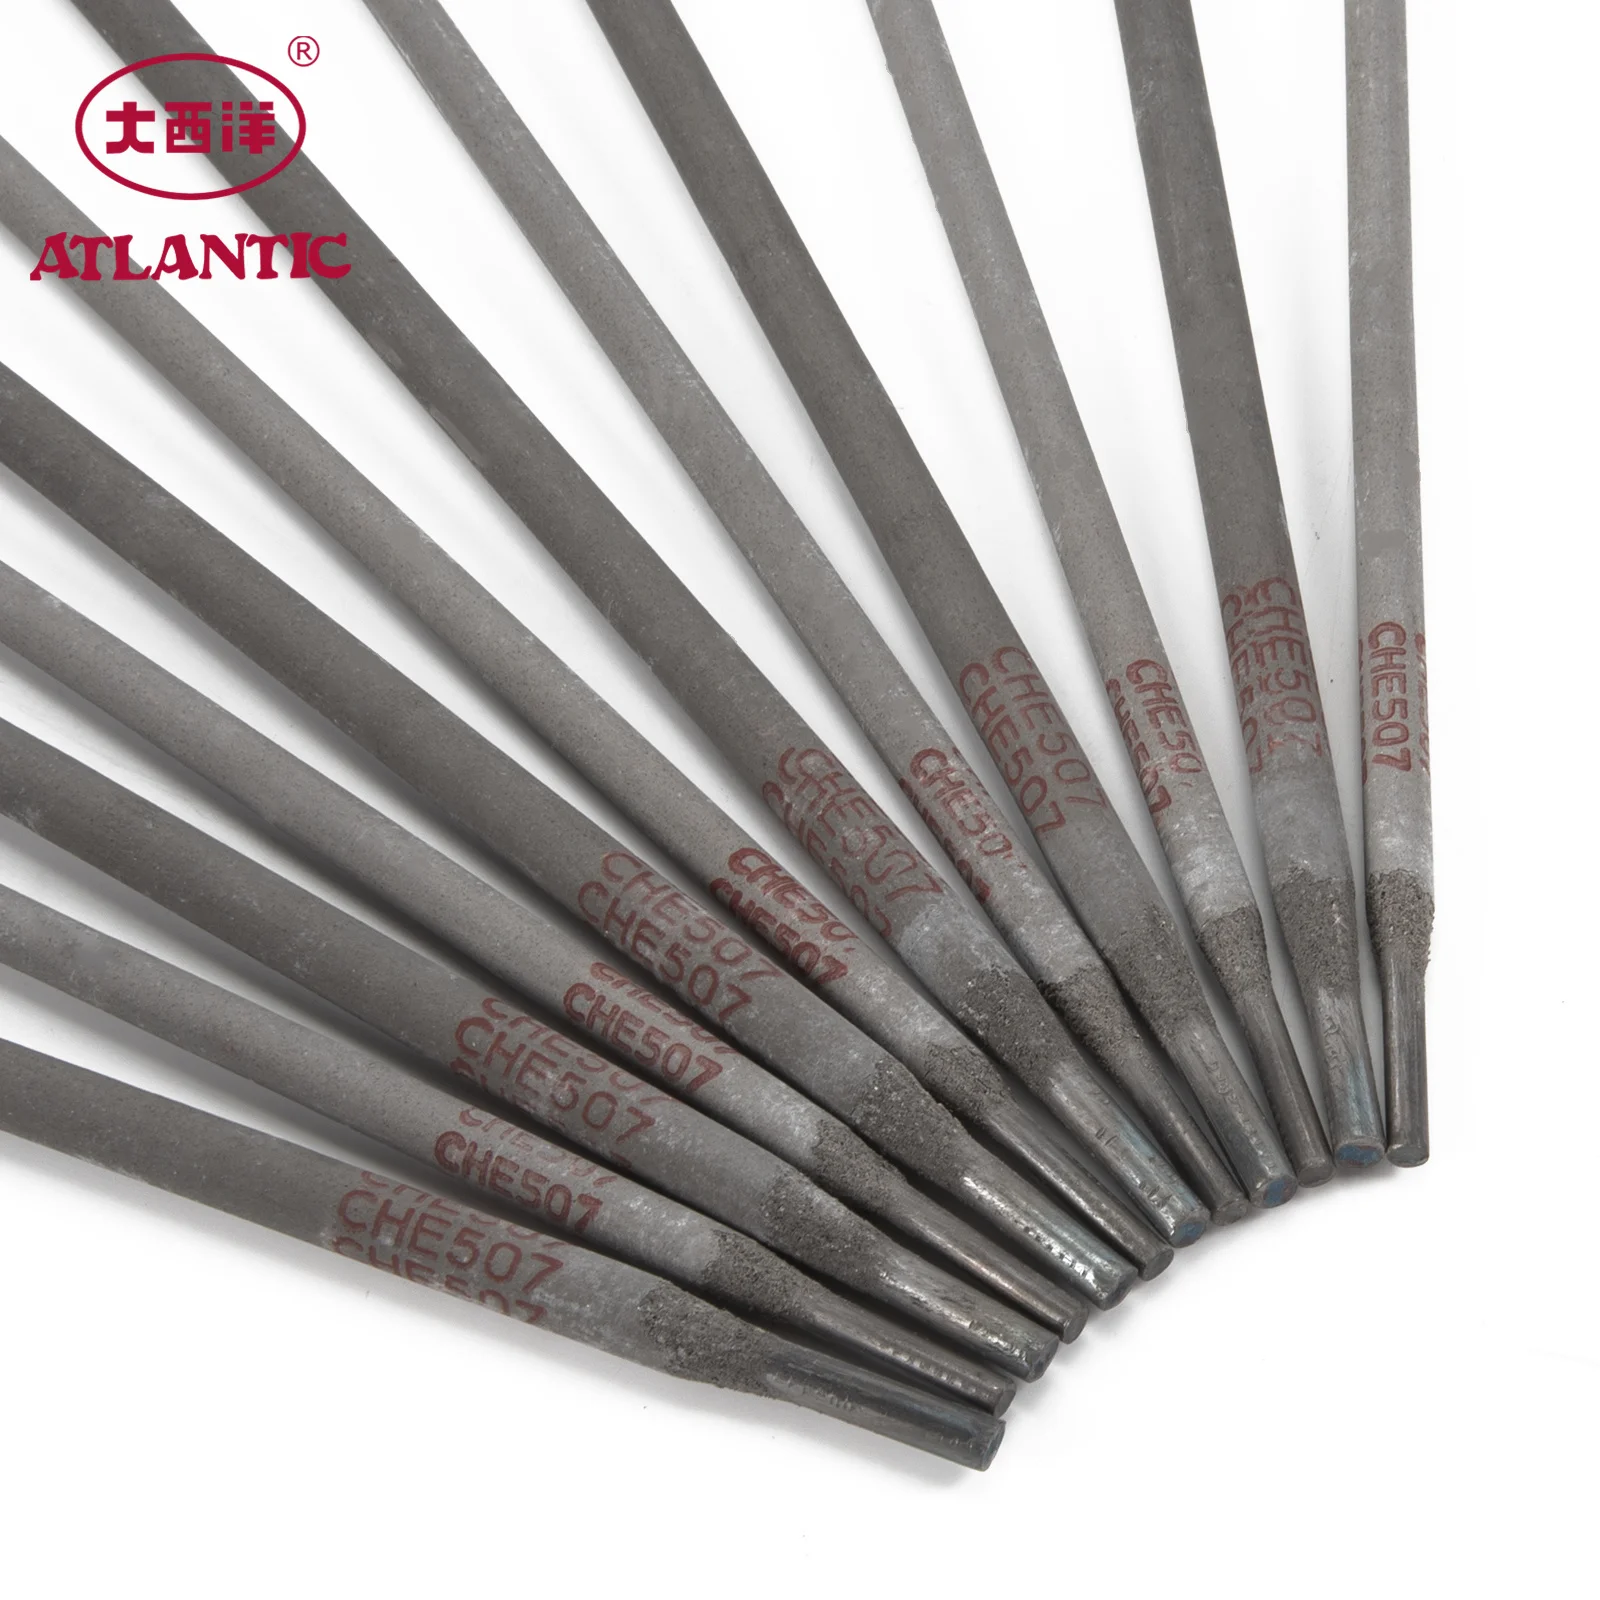 

ATLANTIC OEM Factory Price High Tensile Steels Covered AWS A5.1 E7018-1 4mm AWS ARC Welding Electrode E7018